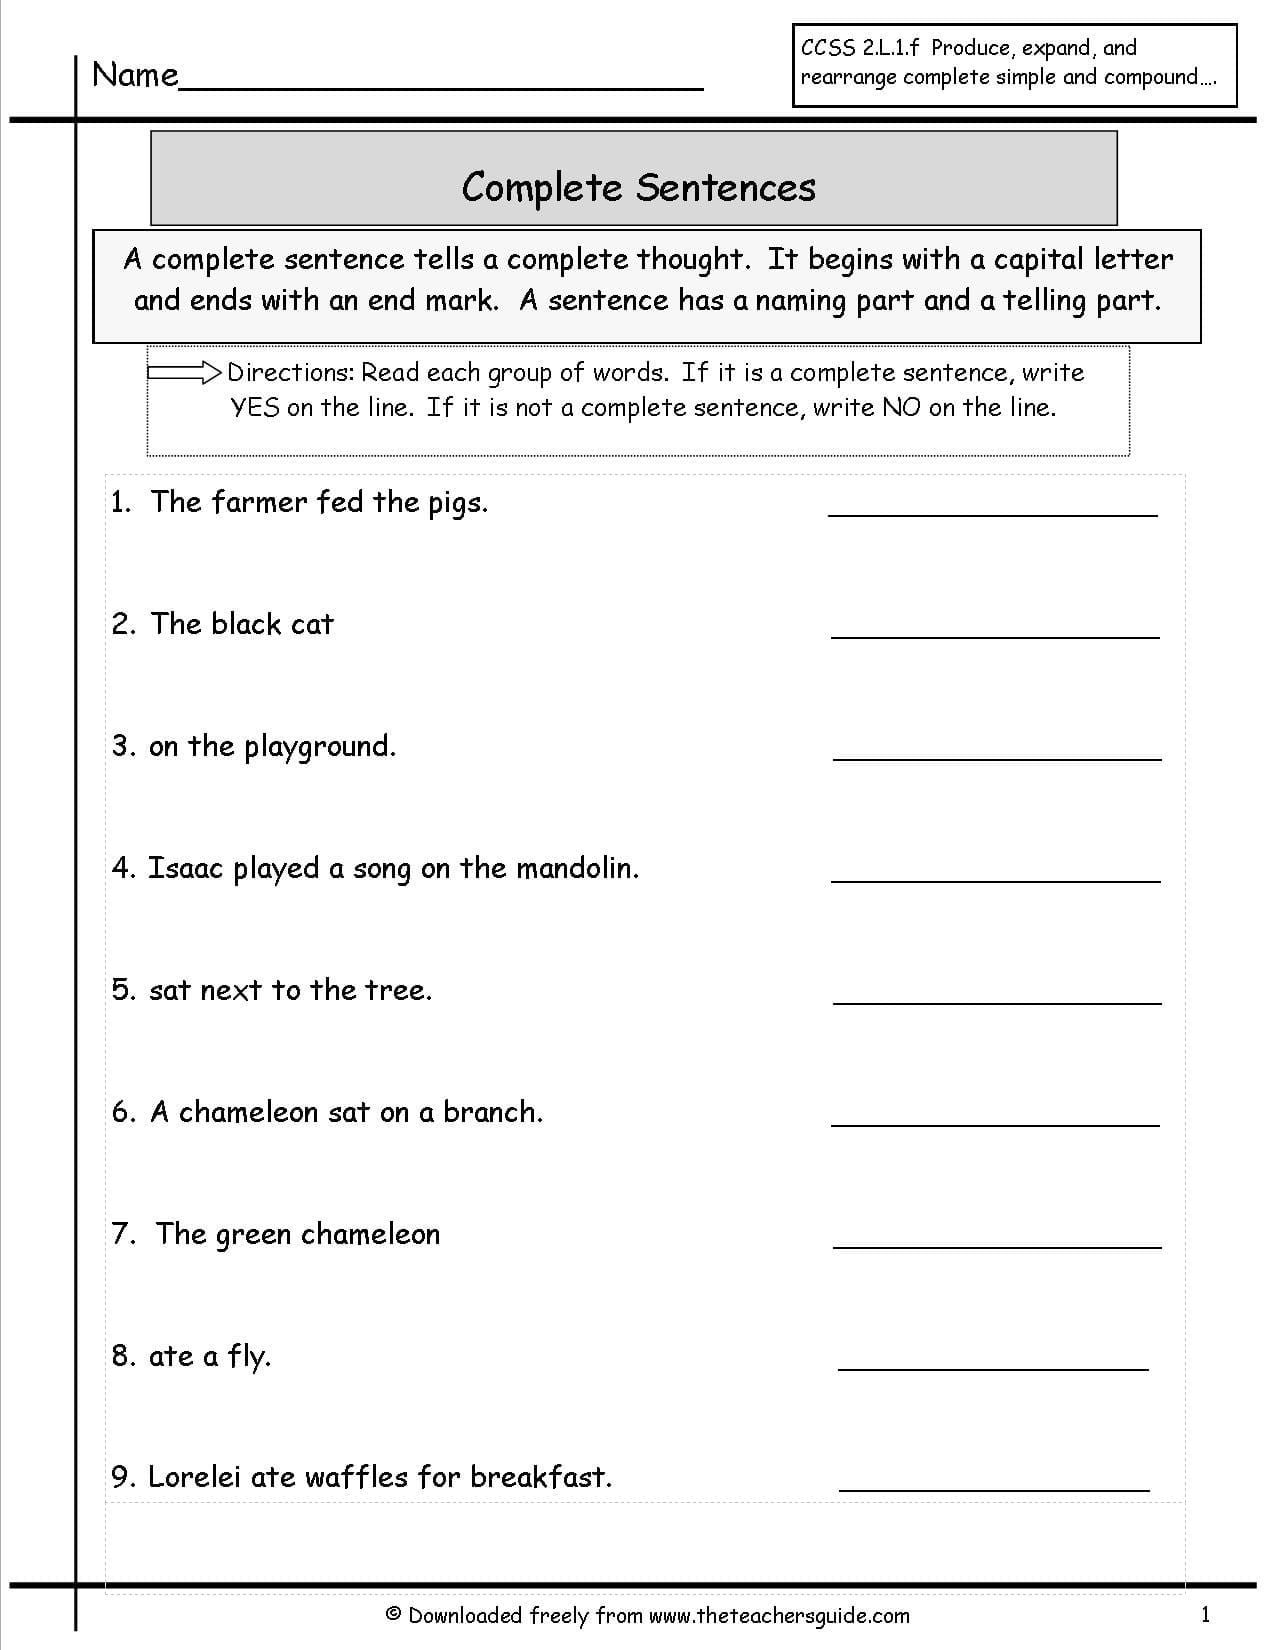 Order Of Sentences Worksheets Assignmenthelp Db excel